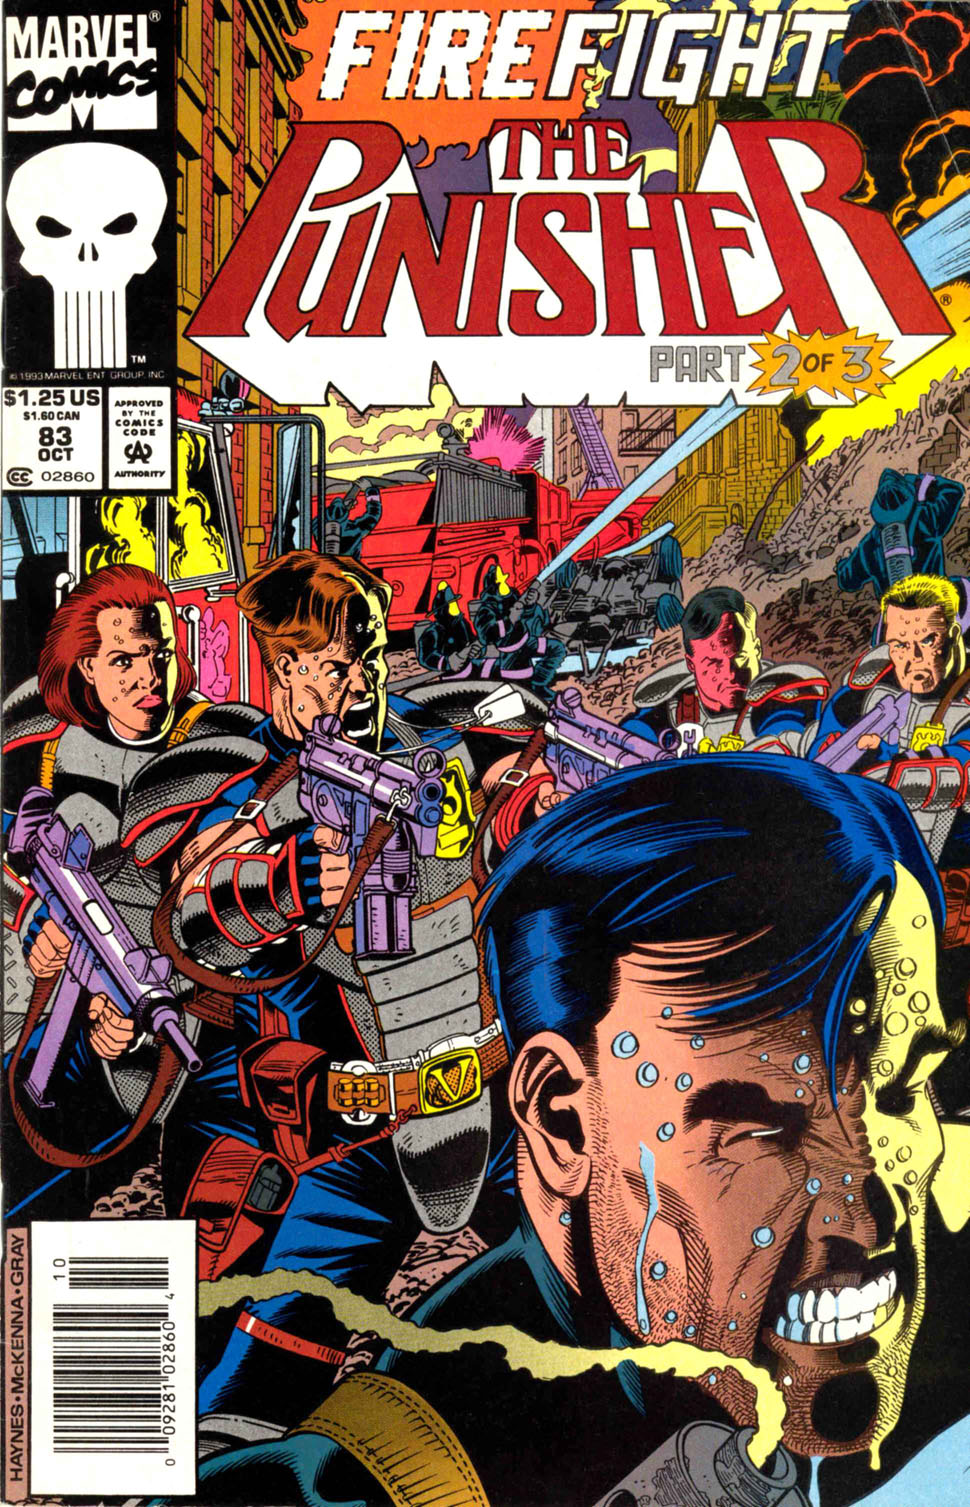 The Punisher (1987) issue 83 - Firefight #02 - Page 1